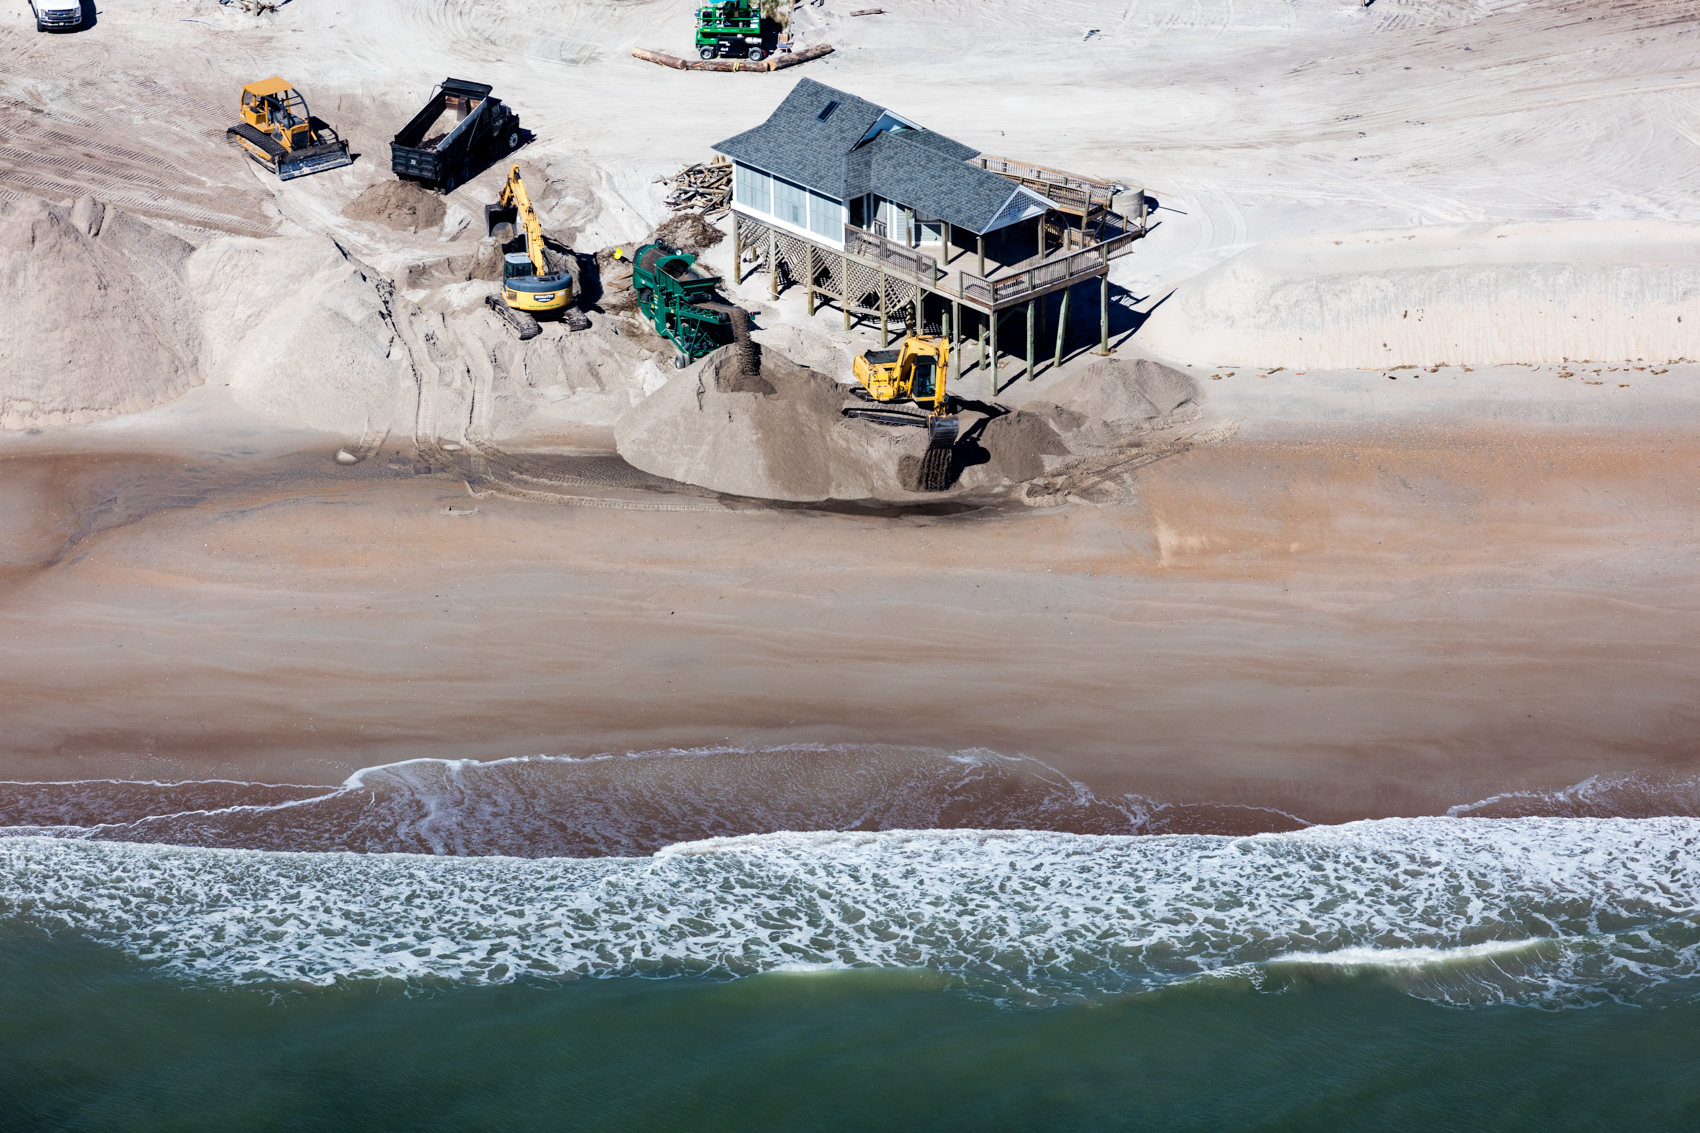 Loads of sand are trucked to North Topsail Beach, North Carolina, to replenish the beach and combat erosion that puts a park building at risk.